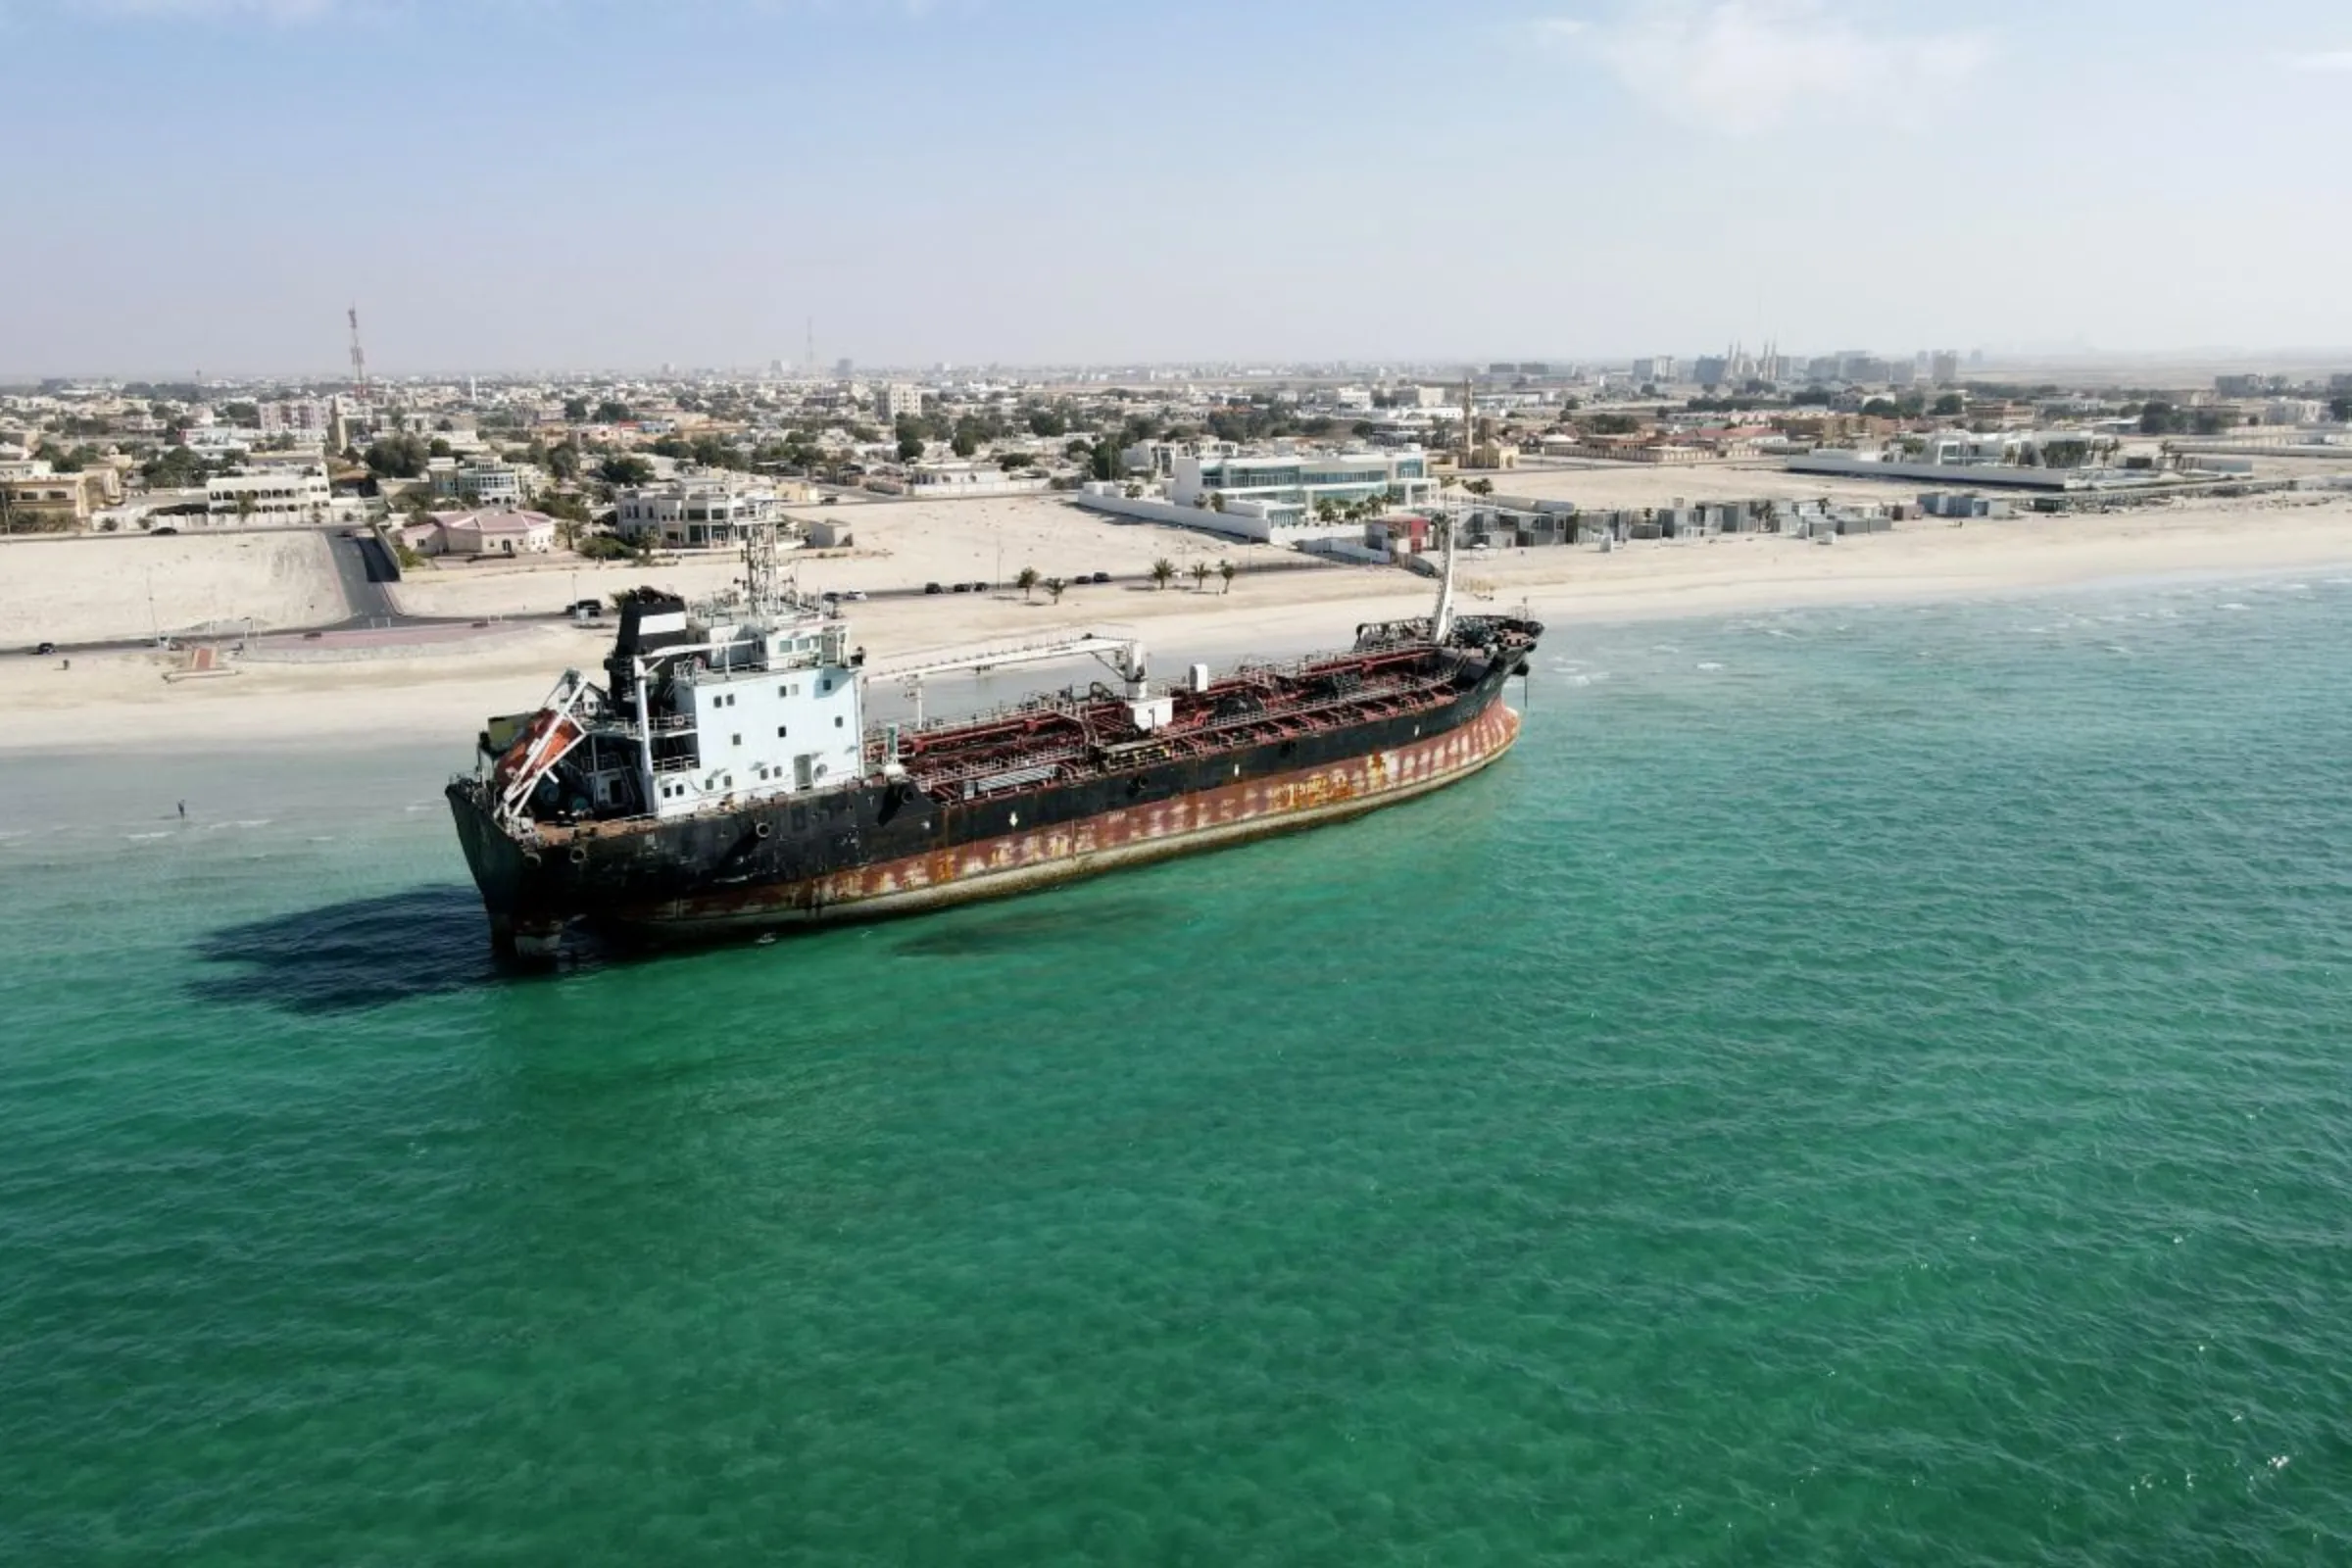 A picture taken with a drone shows an oil tanker named MT Iba in Umm Al Quwain, United Arab Emirates February 8, 2021